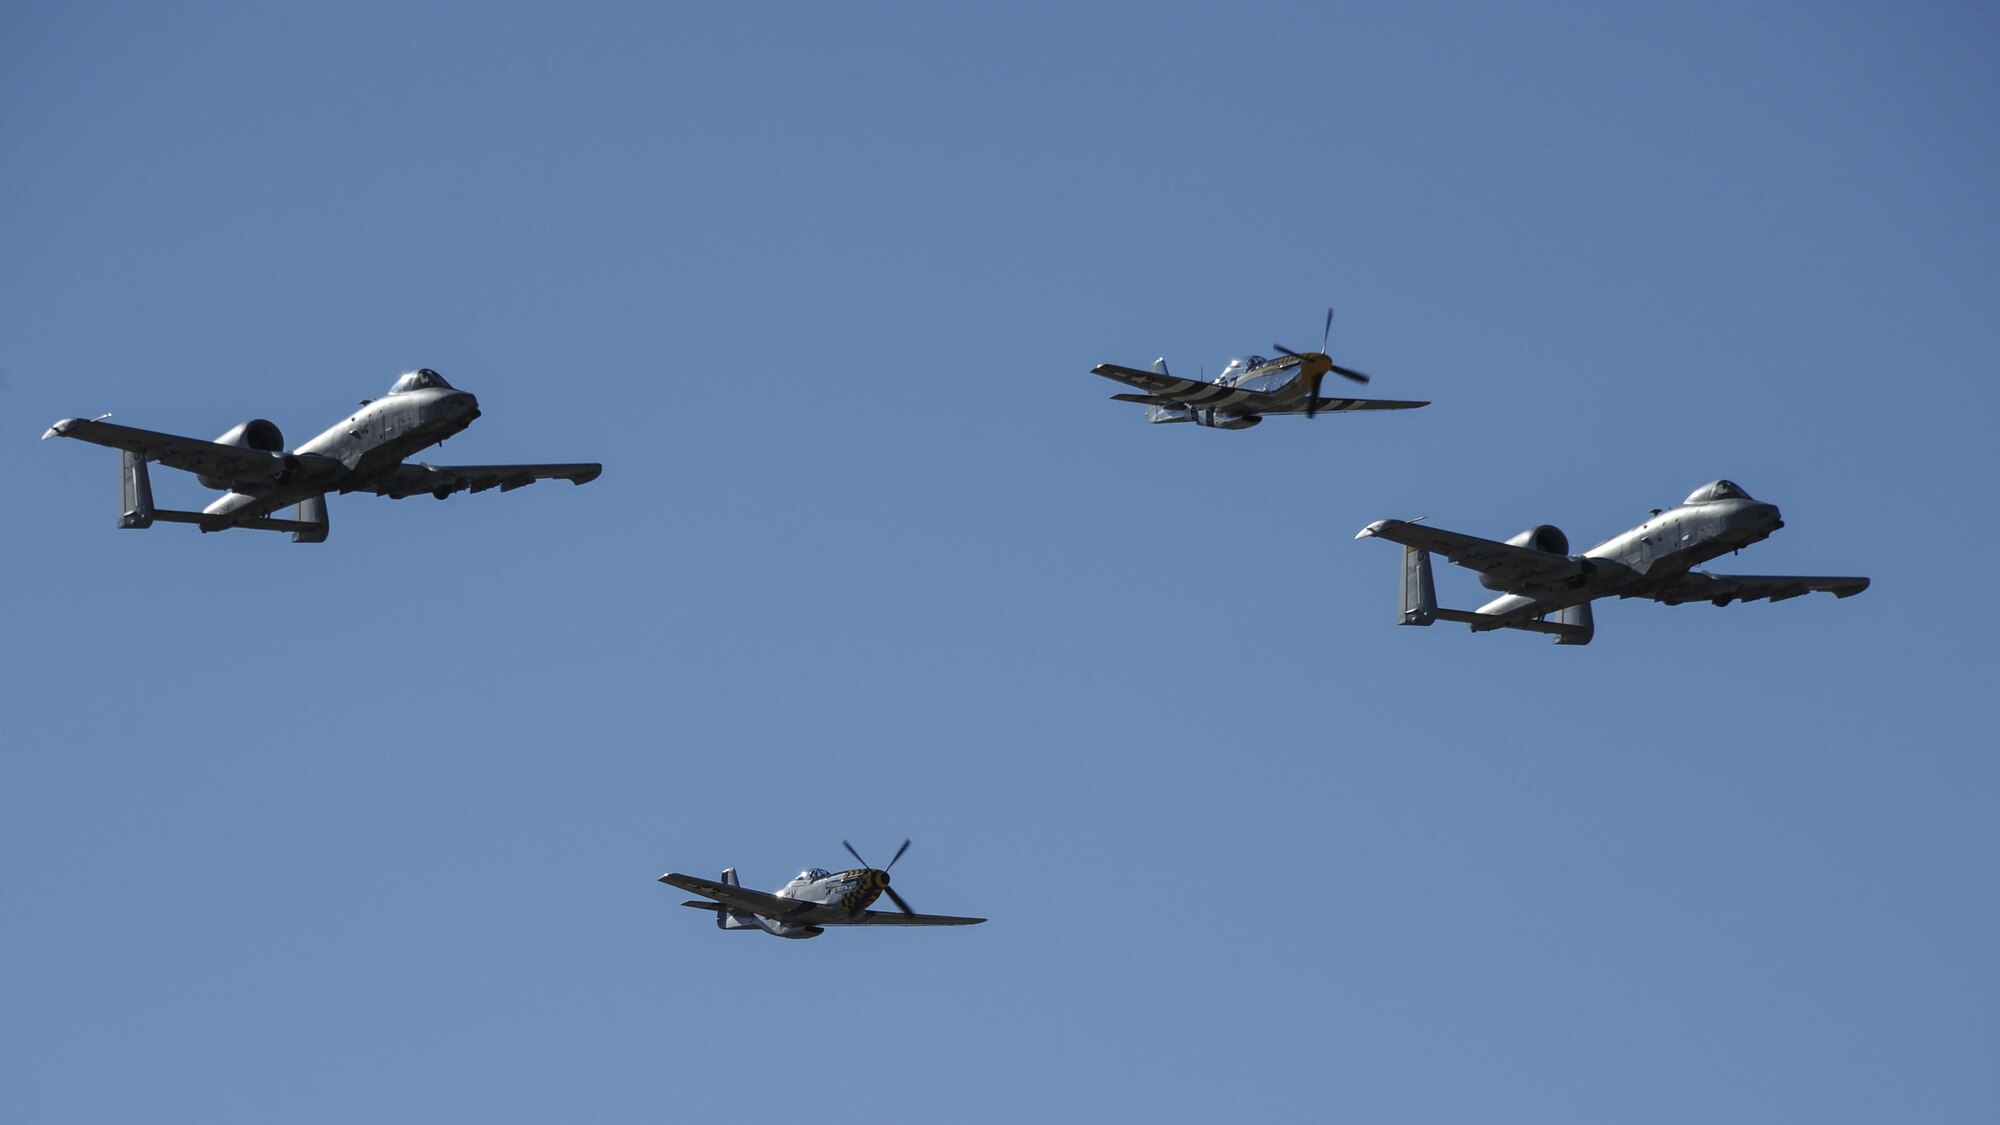 Two U.S. Air Force A-10C Thunderbolt IIs, a P-51 Mustang and a P-40 Warhawk fly in formation during the 2017 Heritage Flight Training and Certification Course at Davis-Monthan Air Force Base, Ariz., Feb. 10, 2017. The historic aircraft included the P-51 and T-51 Mustang, the P-40 Warhawk, the P-38 Lightning, the P-47 Thunderbolt, the T-33 Shooting Star and the F-86 Sabre. (U.S. Air Force photo by Airman 1st Class Mya M. Crosby)